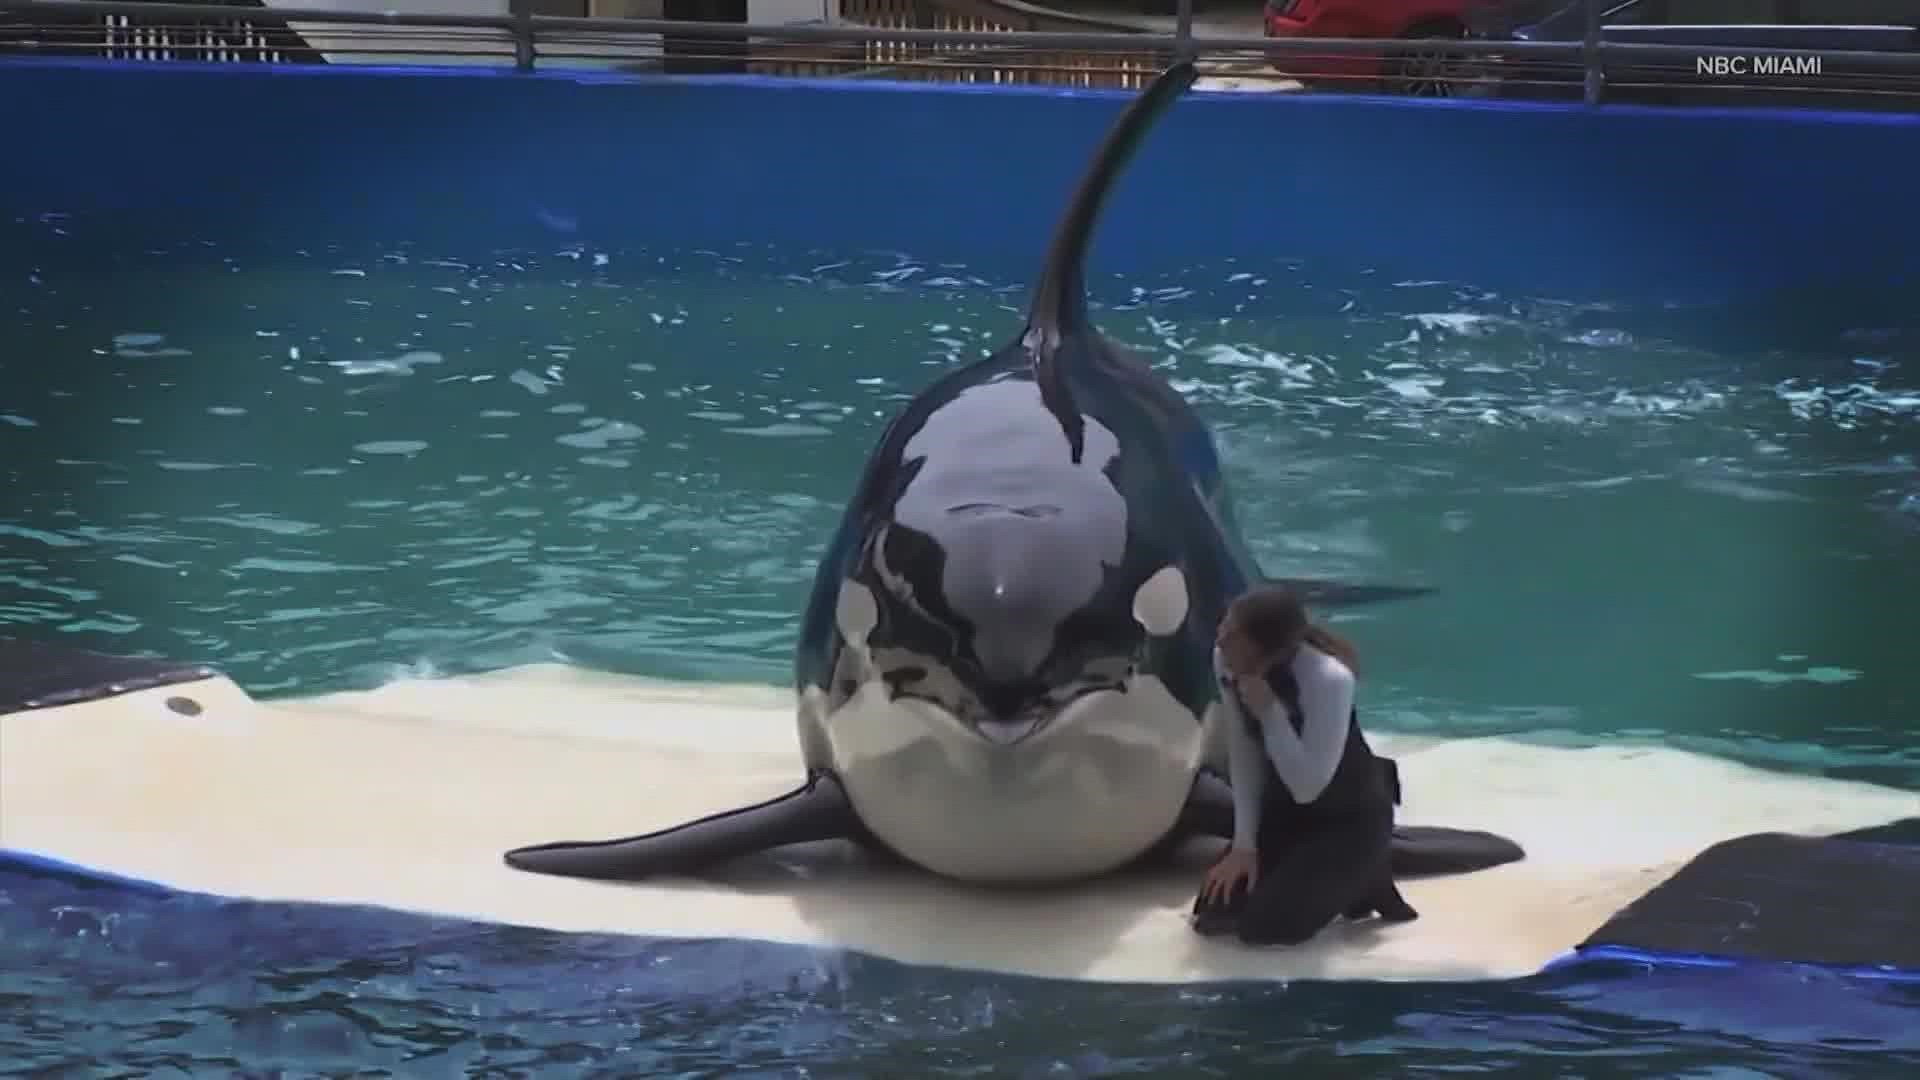 Tokitae, also known as Lolita, has lived in captivity at the Miami Seaquarium for the past 52 years.